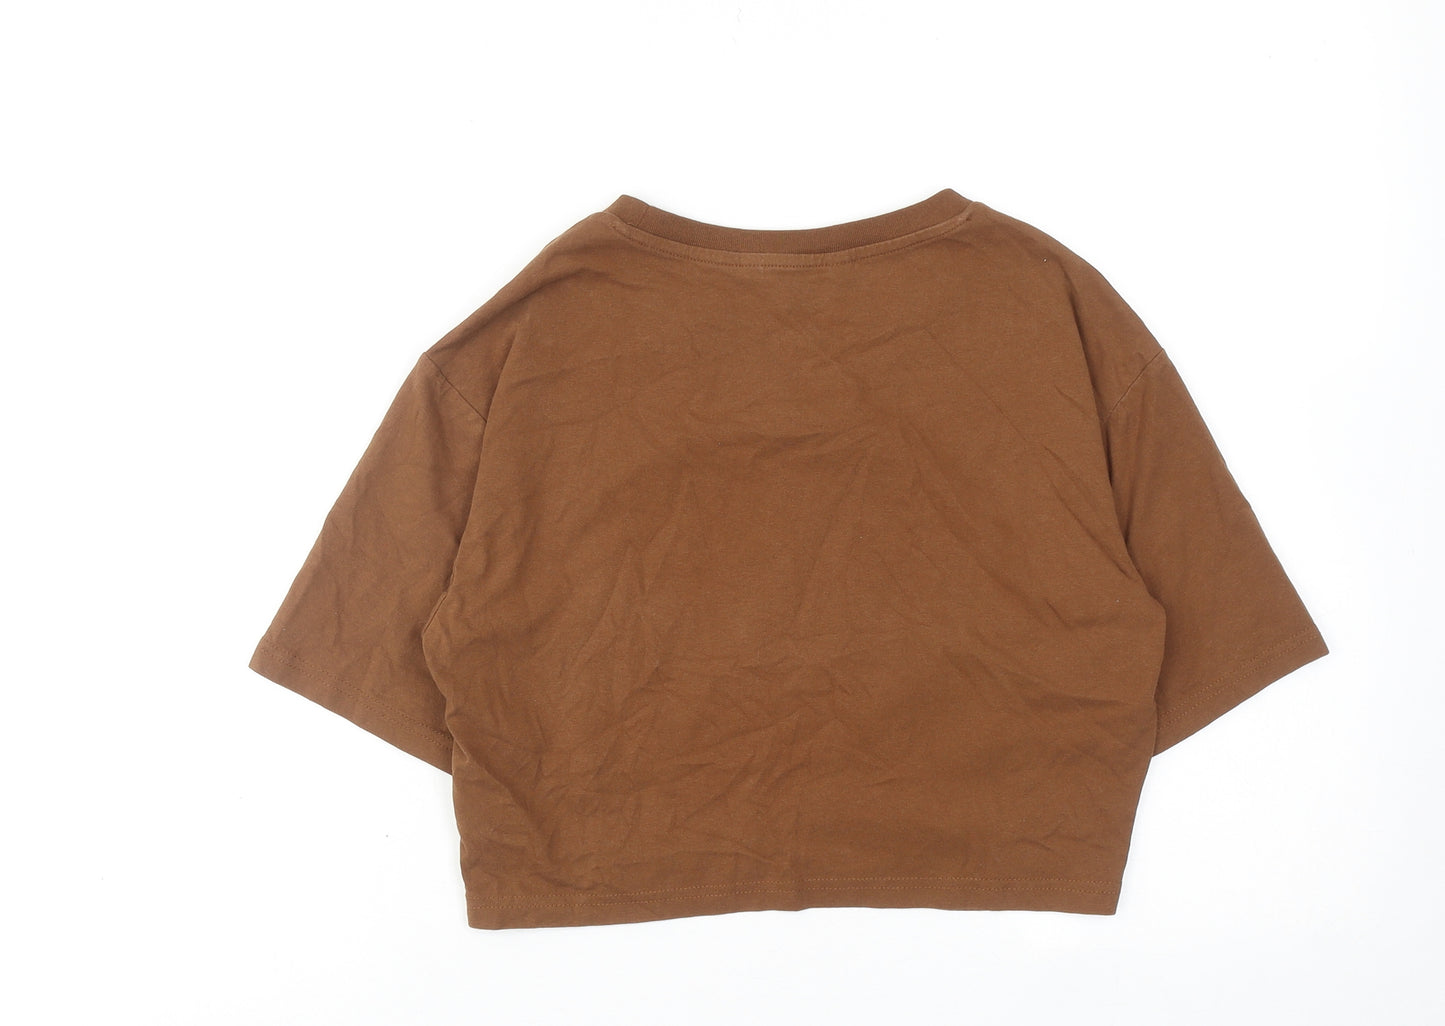 Urban Revivo Womens Brown Cotton Cropped T-Shirt Size 8 Round Neck - Ring Detail